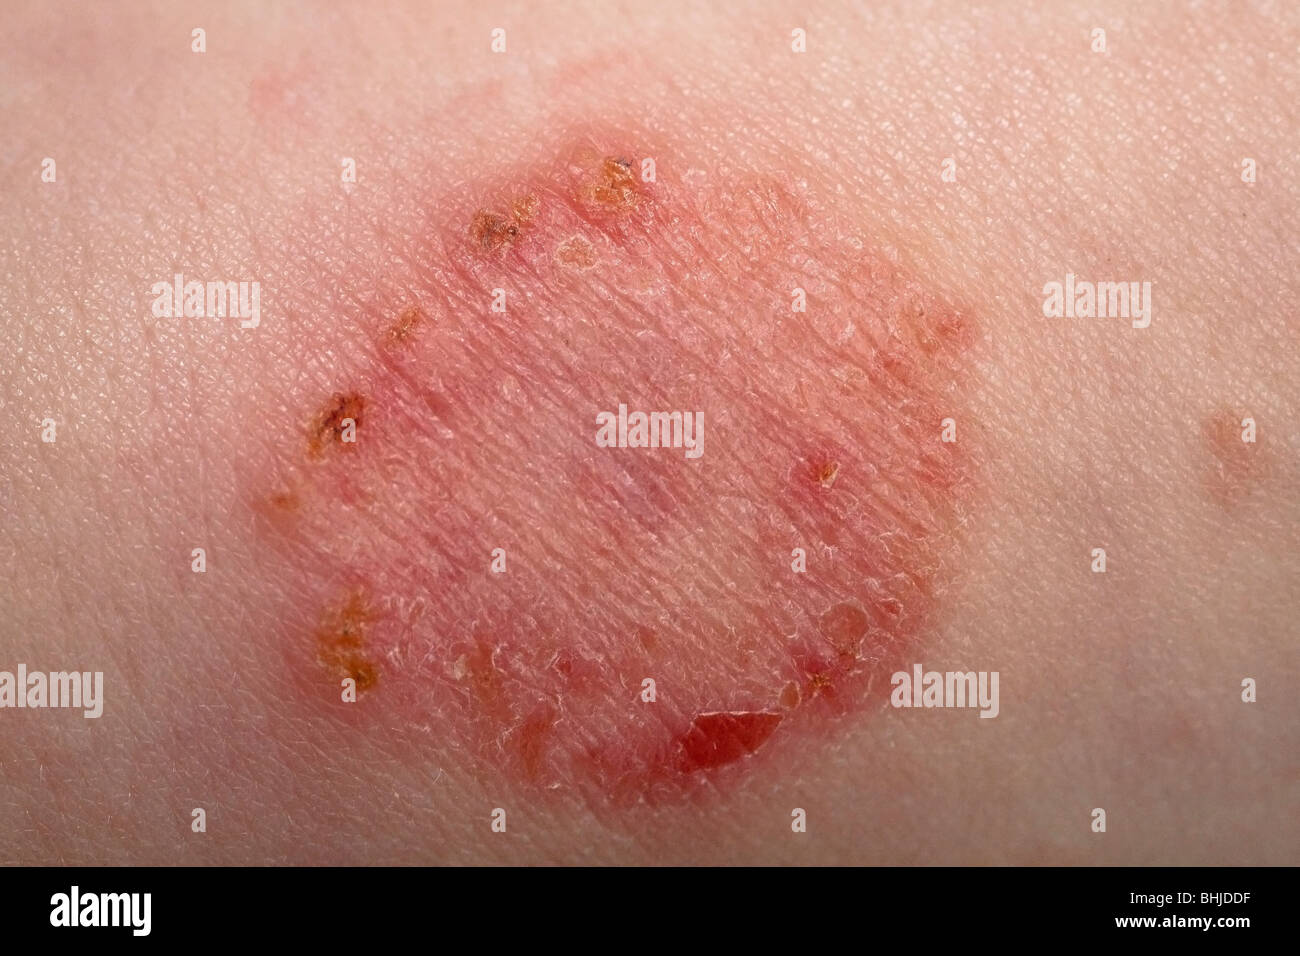 Fungal Infection Called Tinea Corporis In Leg Of Asian Woman Stock Photo -  Download Image Now - iStock